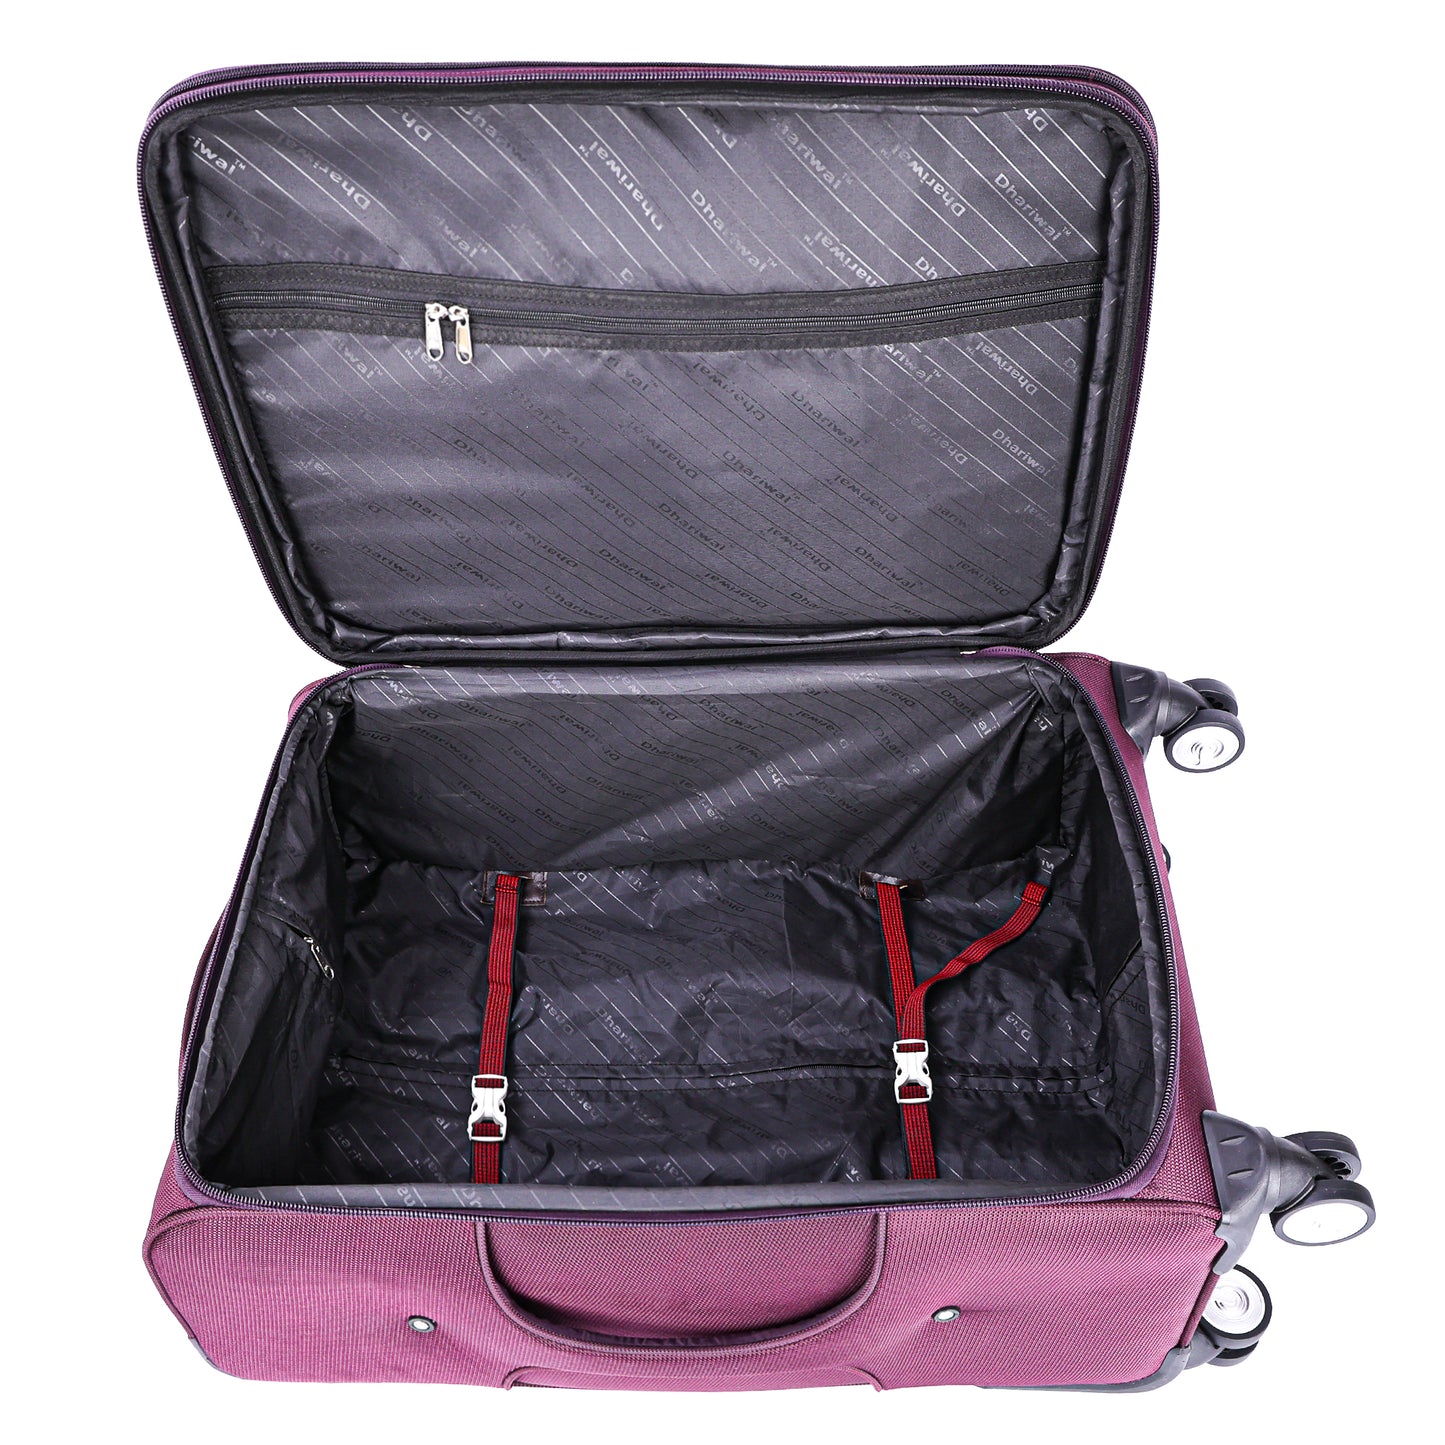 Dhariwal Expandable 4W Soft Sided Check-in Trolley Suitcase 20/24/28 inch SC-808